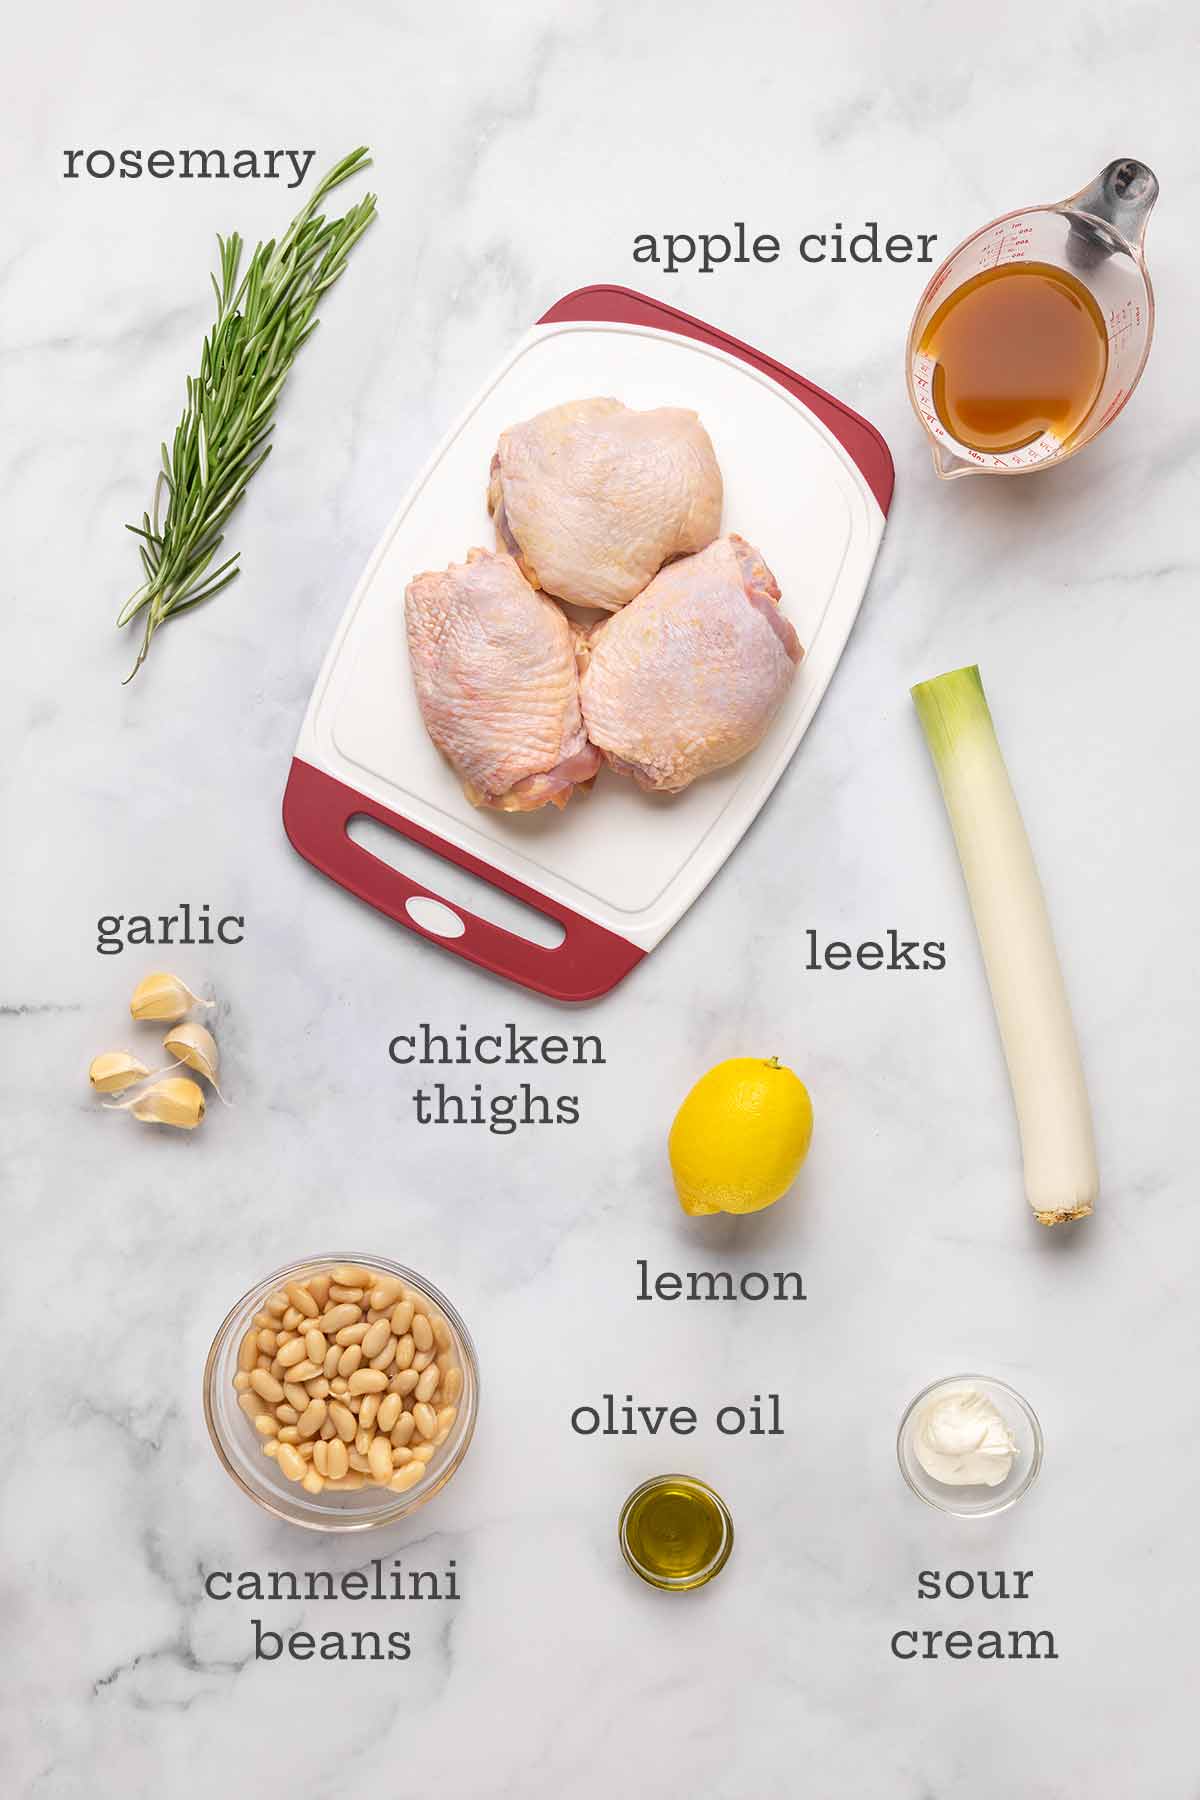 Ingredients for rosemary chicken--chicken thighs, rosemary, apple cider, garlic, leeks, lemon, beans, oil, and sour cream.